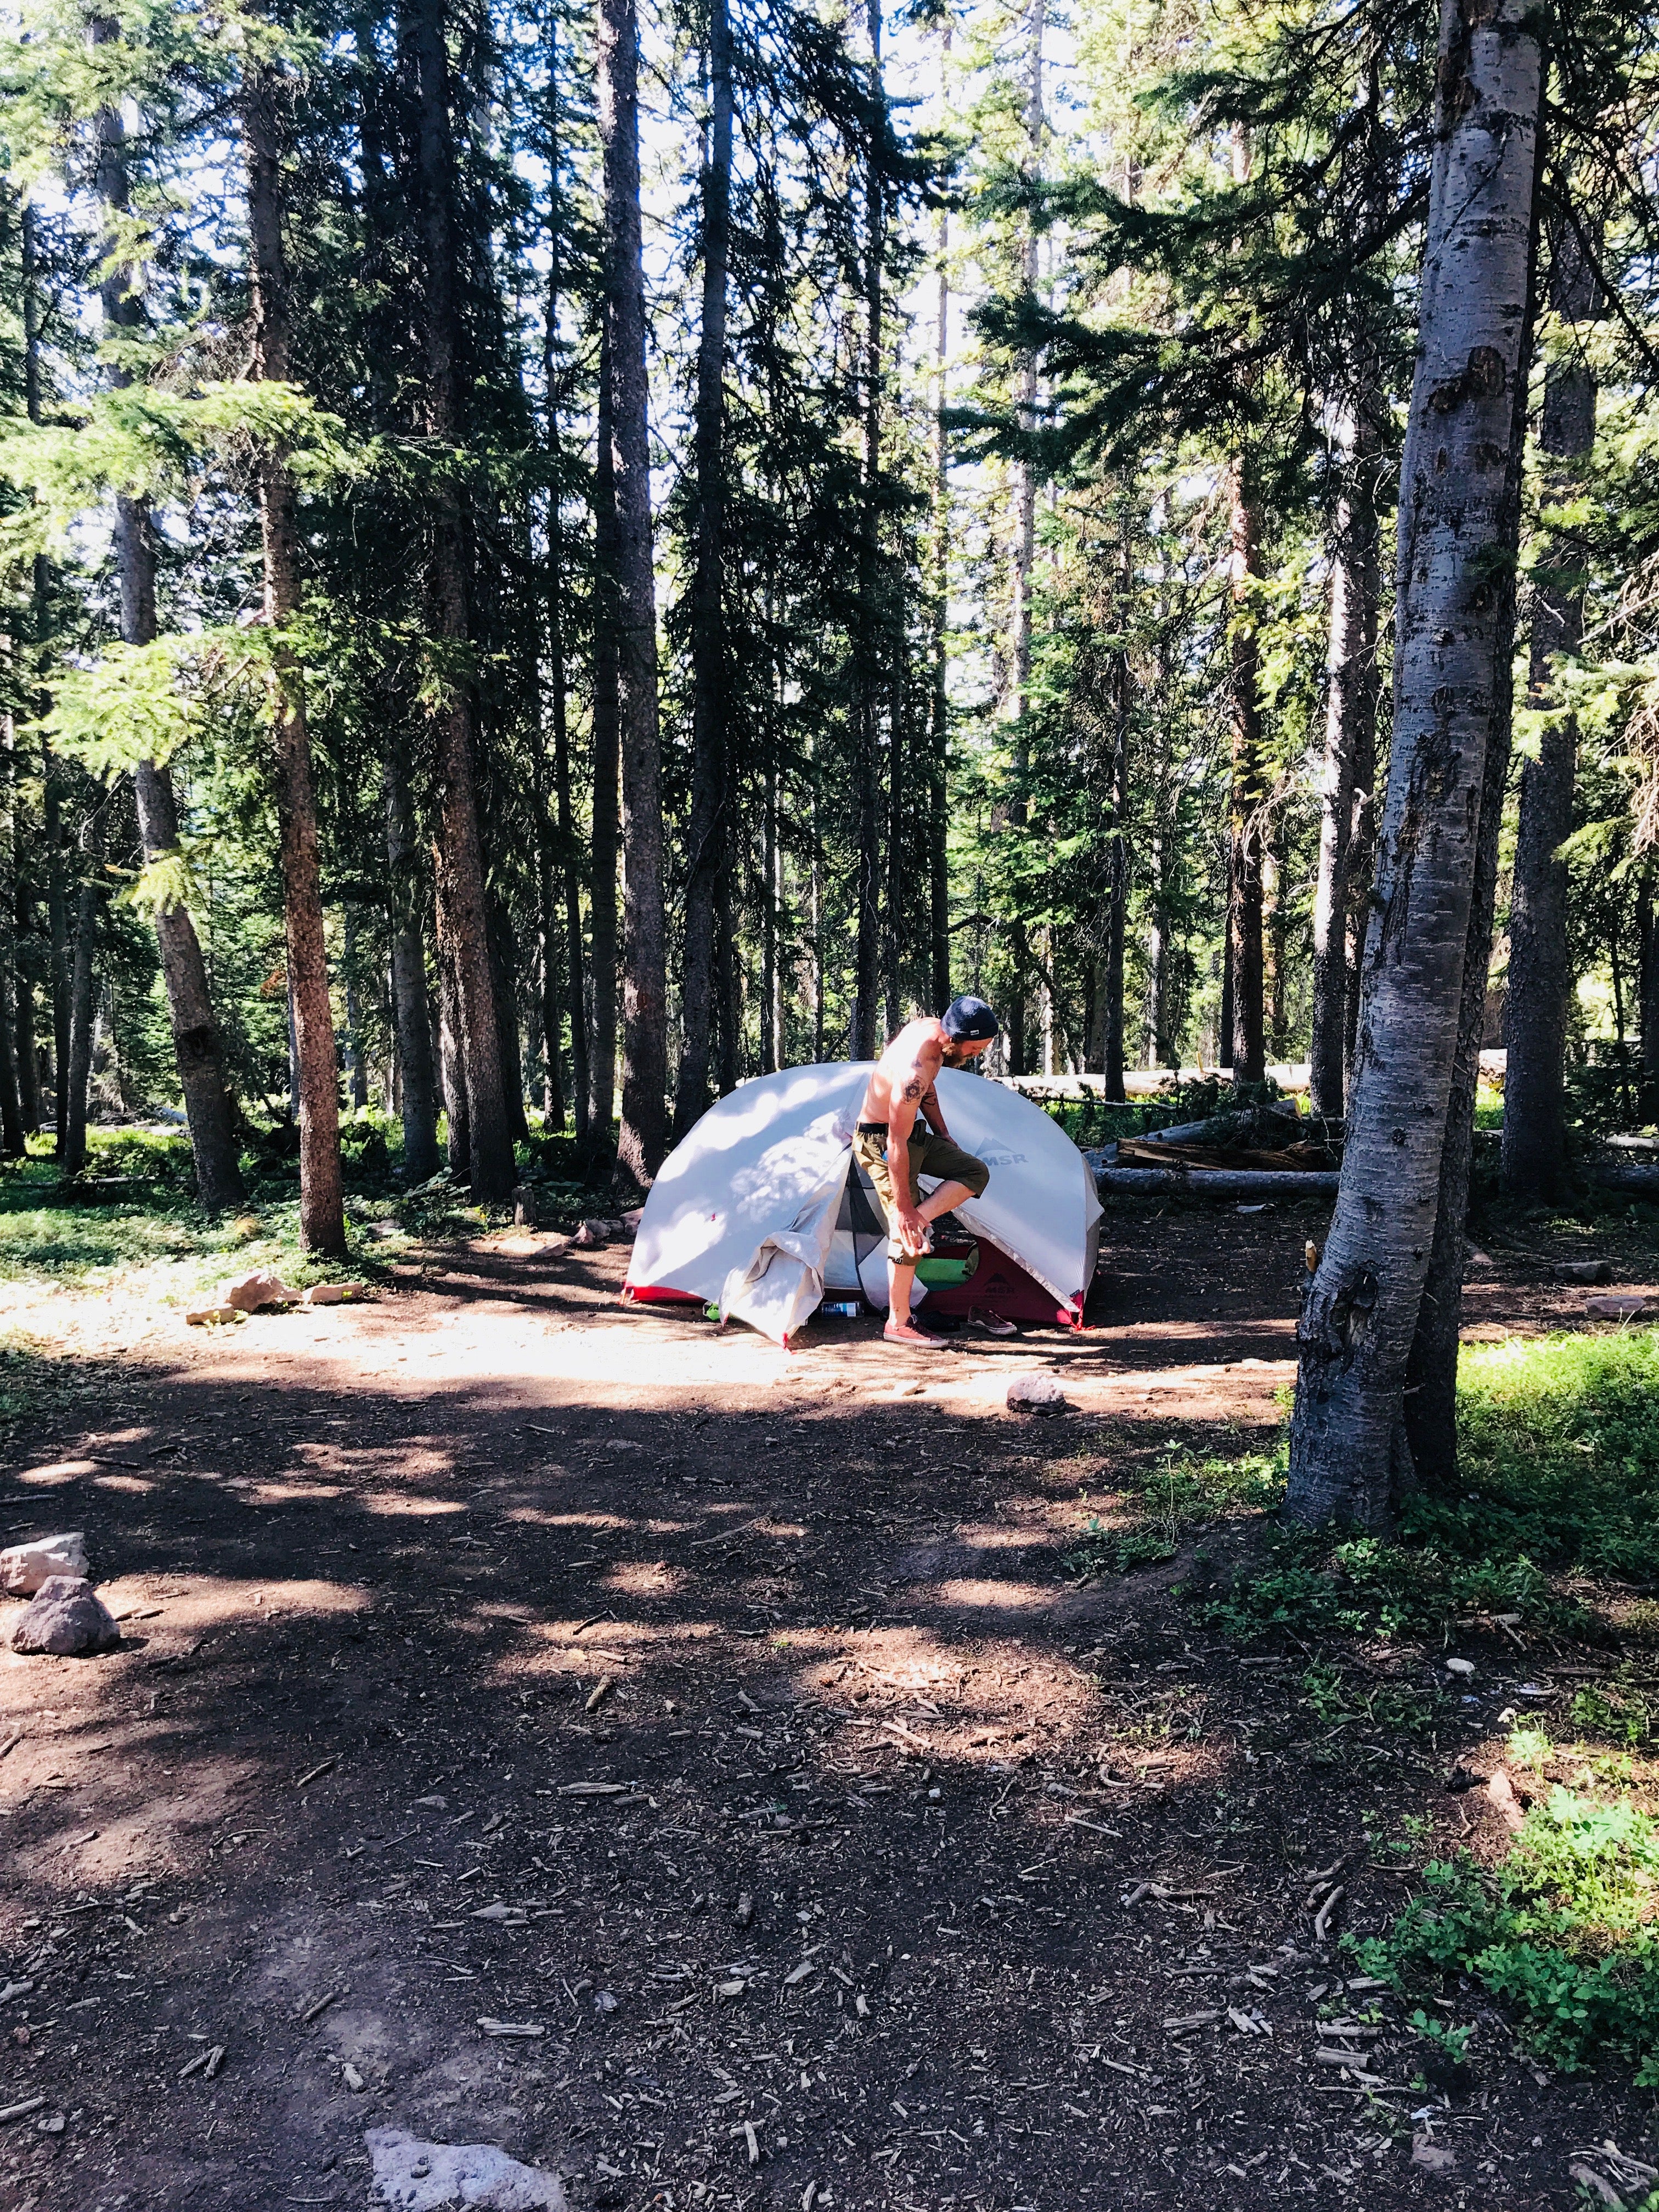 Camper submitted image from Eagle-Holy Cross Ranger District (Vail-Eagle area) - 5